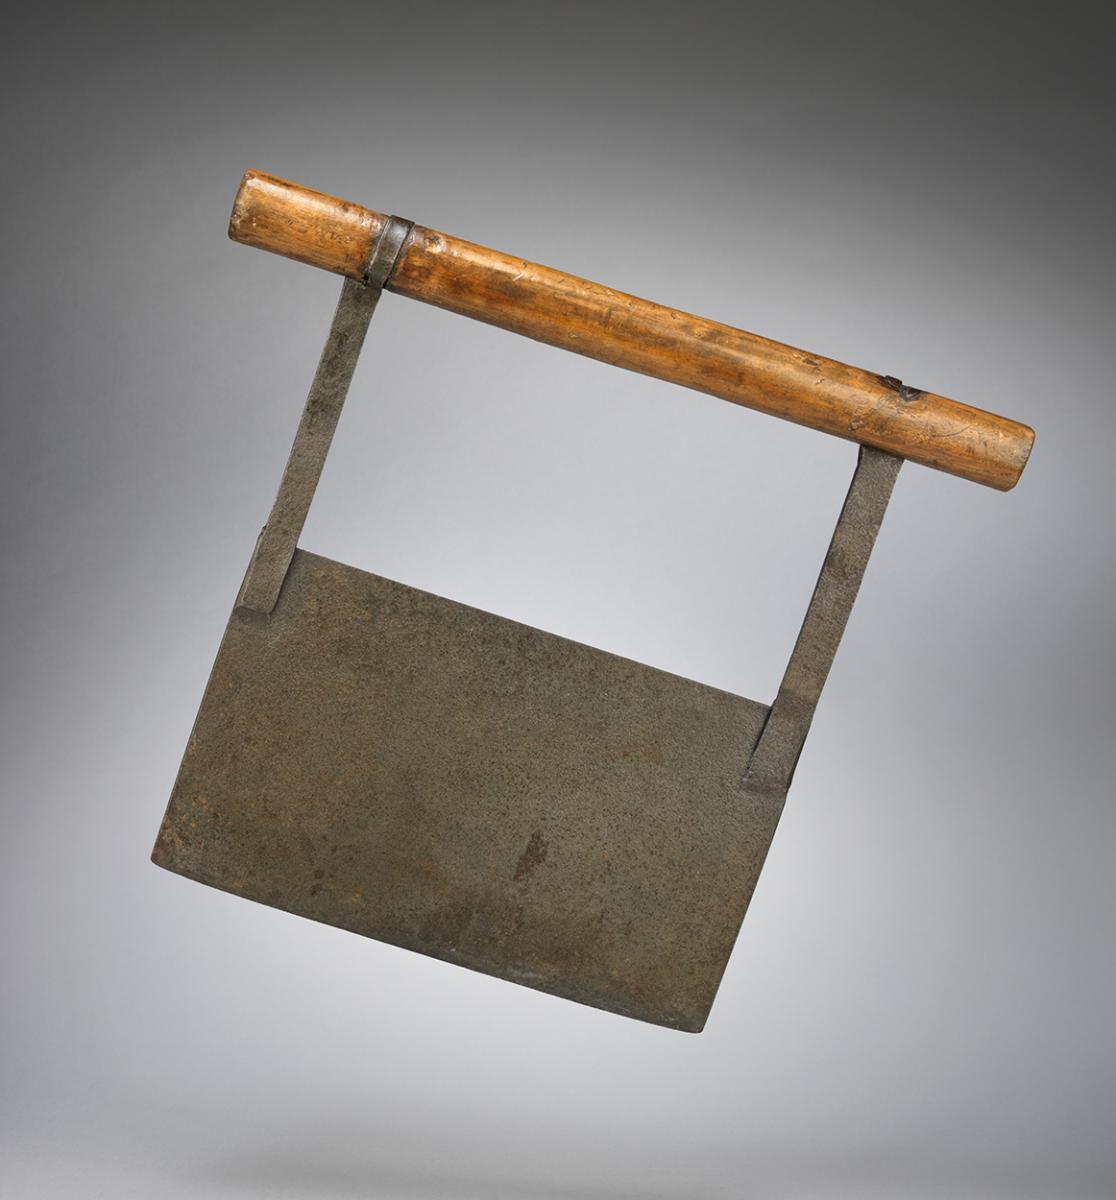 Of Traditional Form with Original Wooden Handle  Wrought Sheet Metal and Well Patinated Wood  Northern European, c.1850